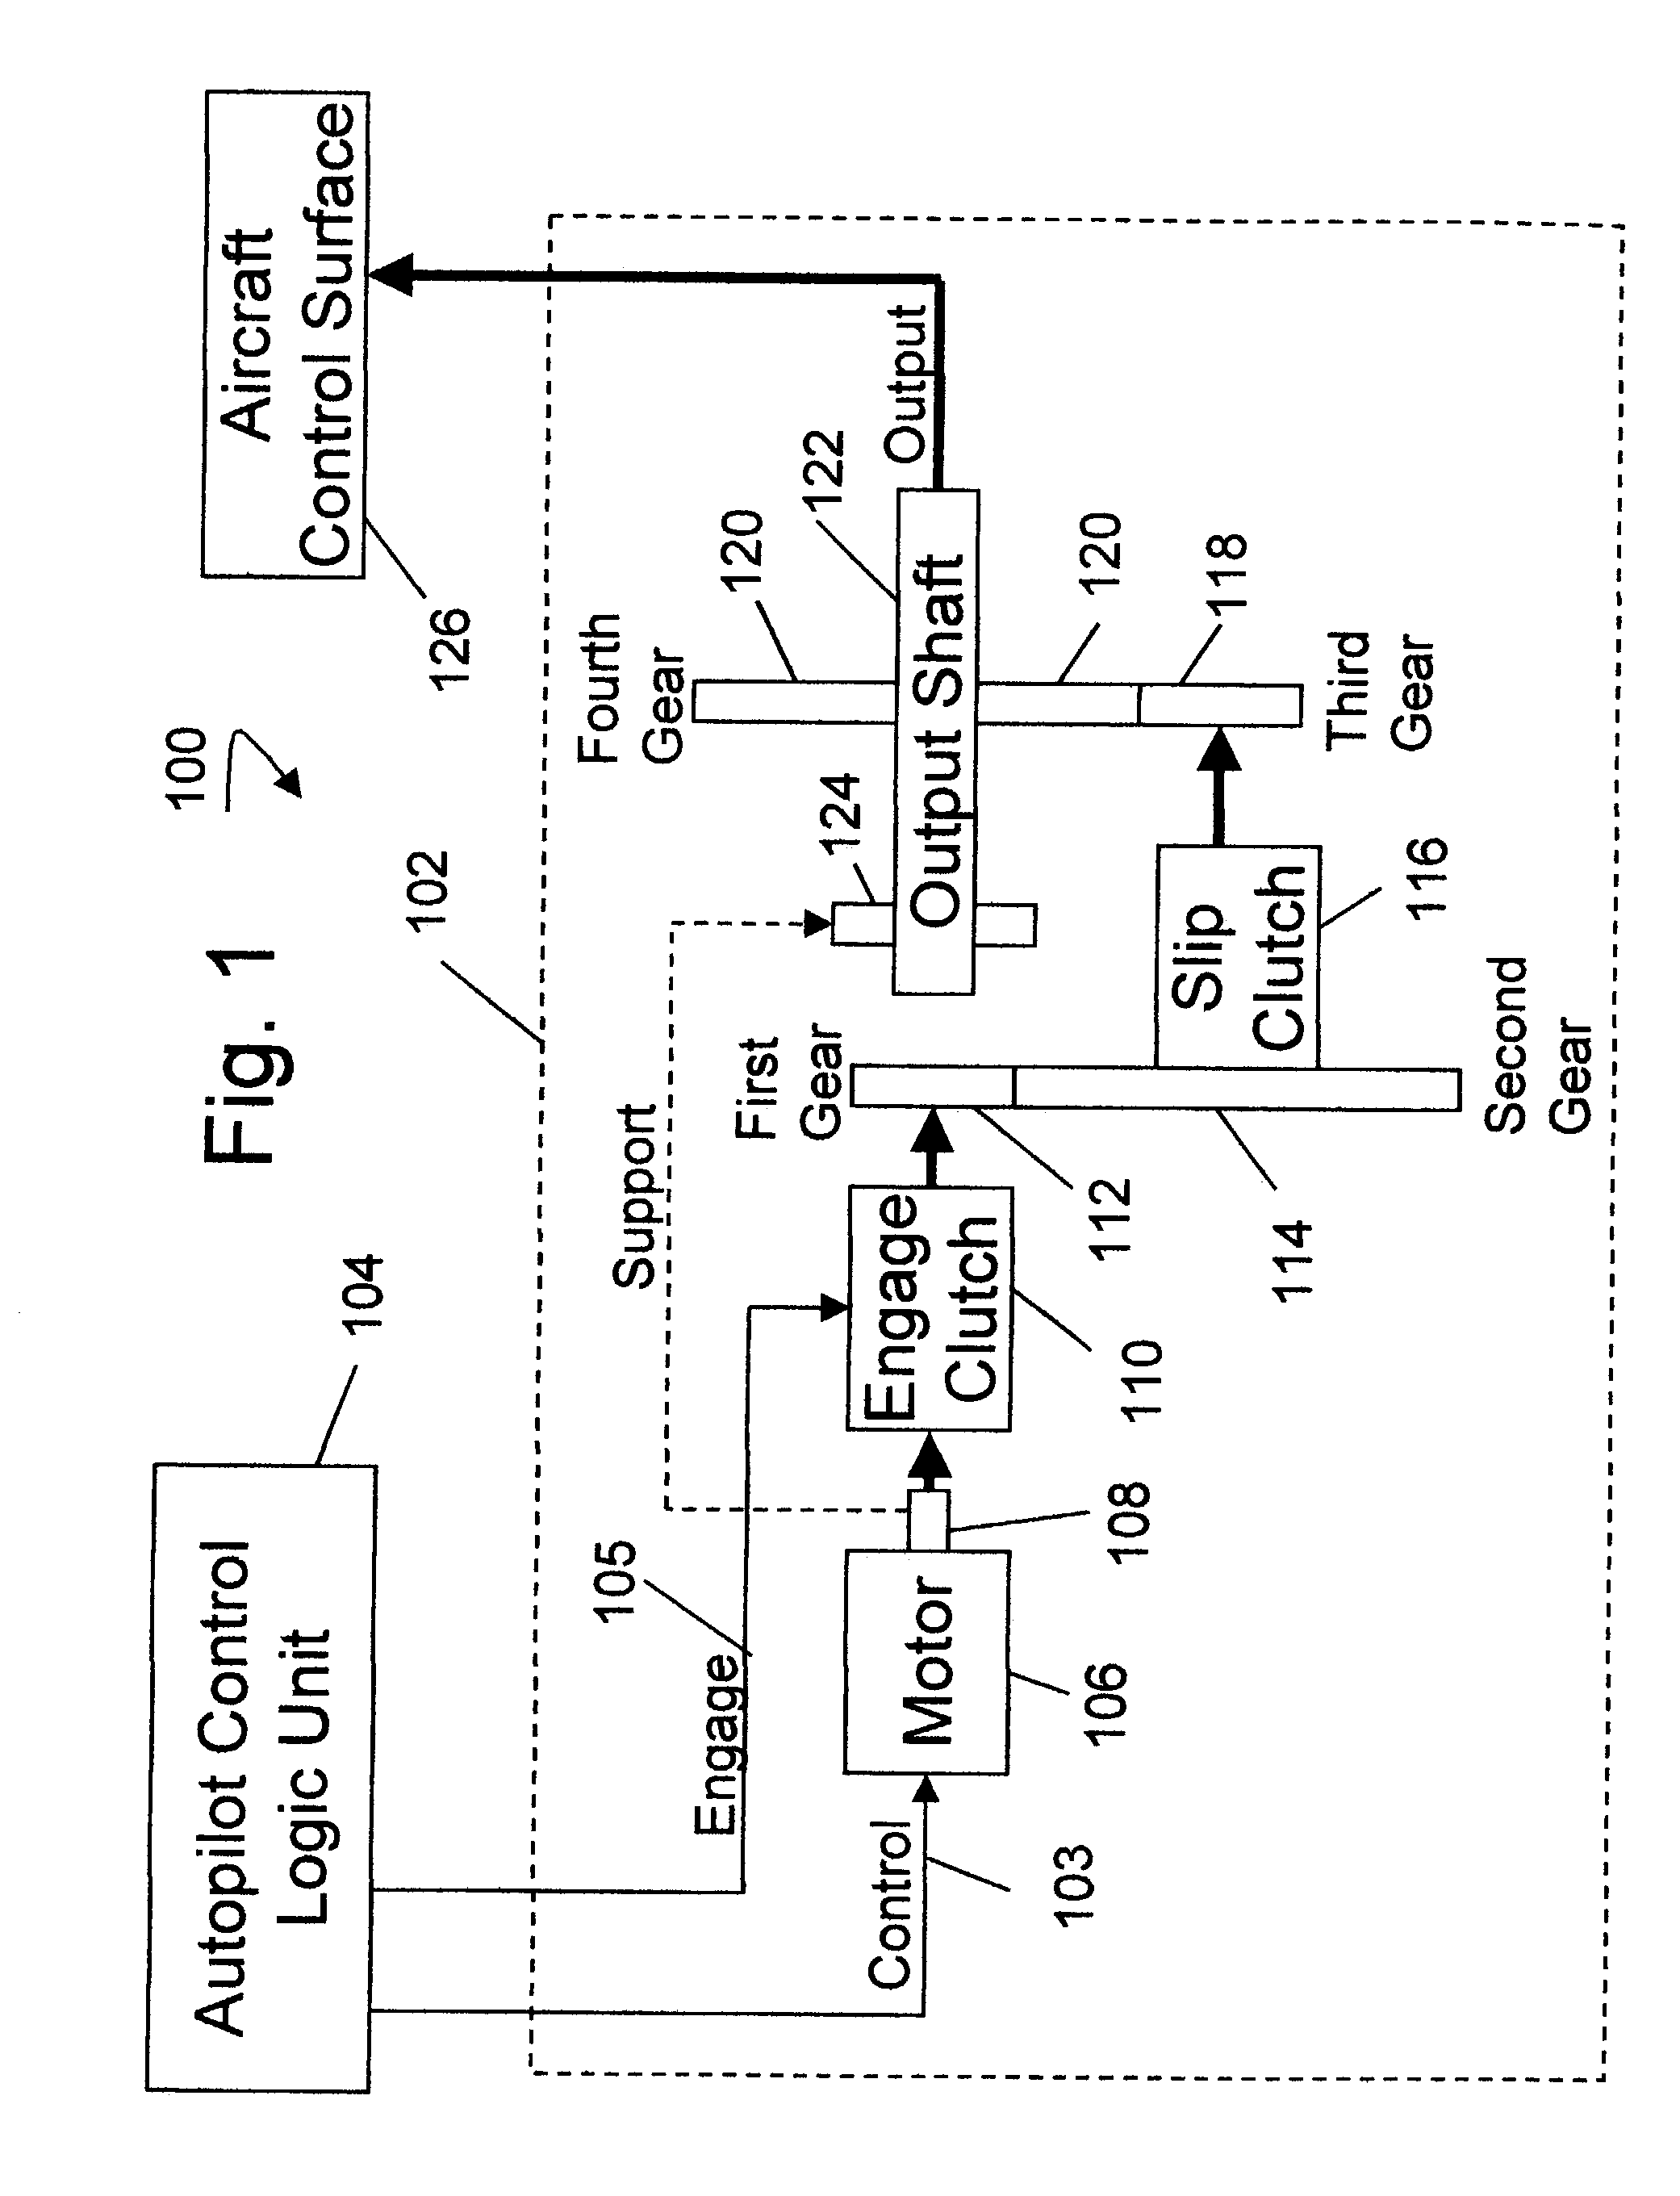 Apparatus and method for servo control of an aircraft